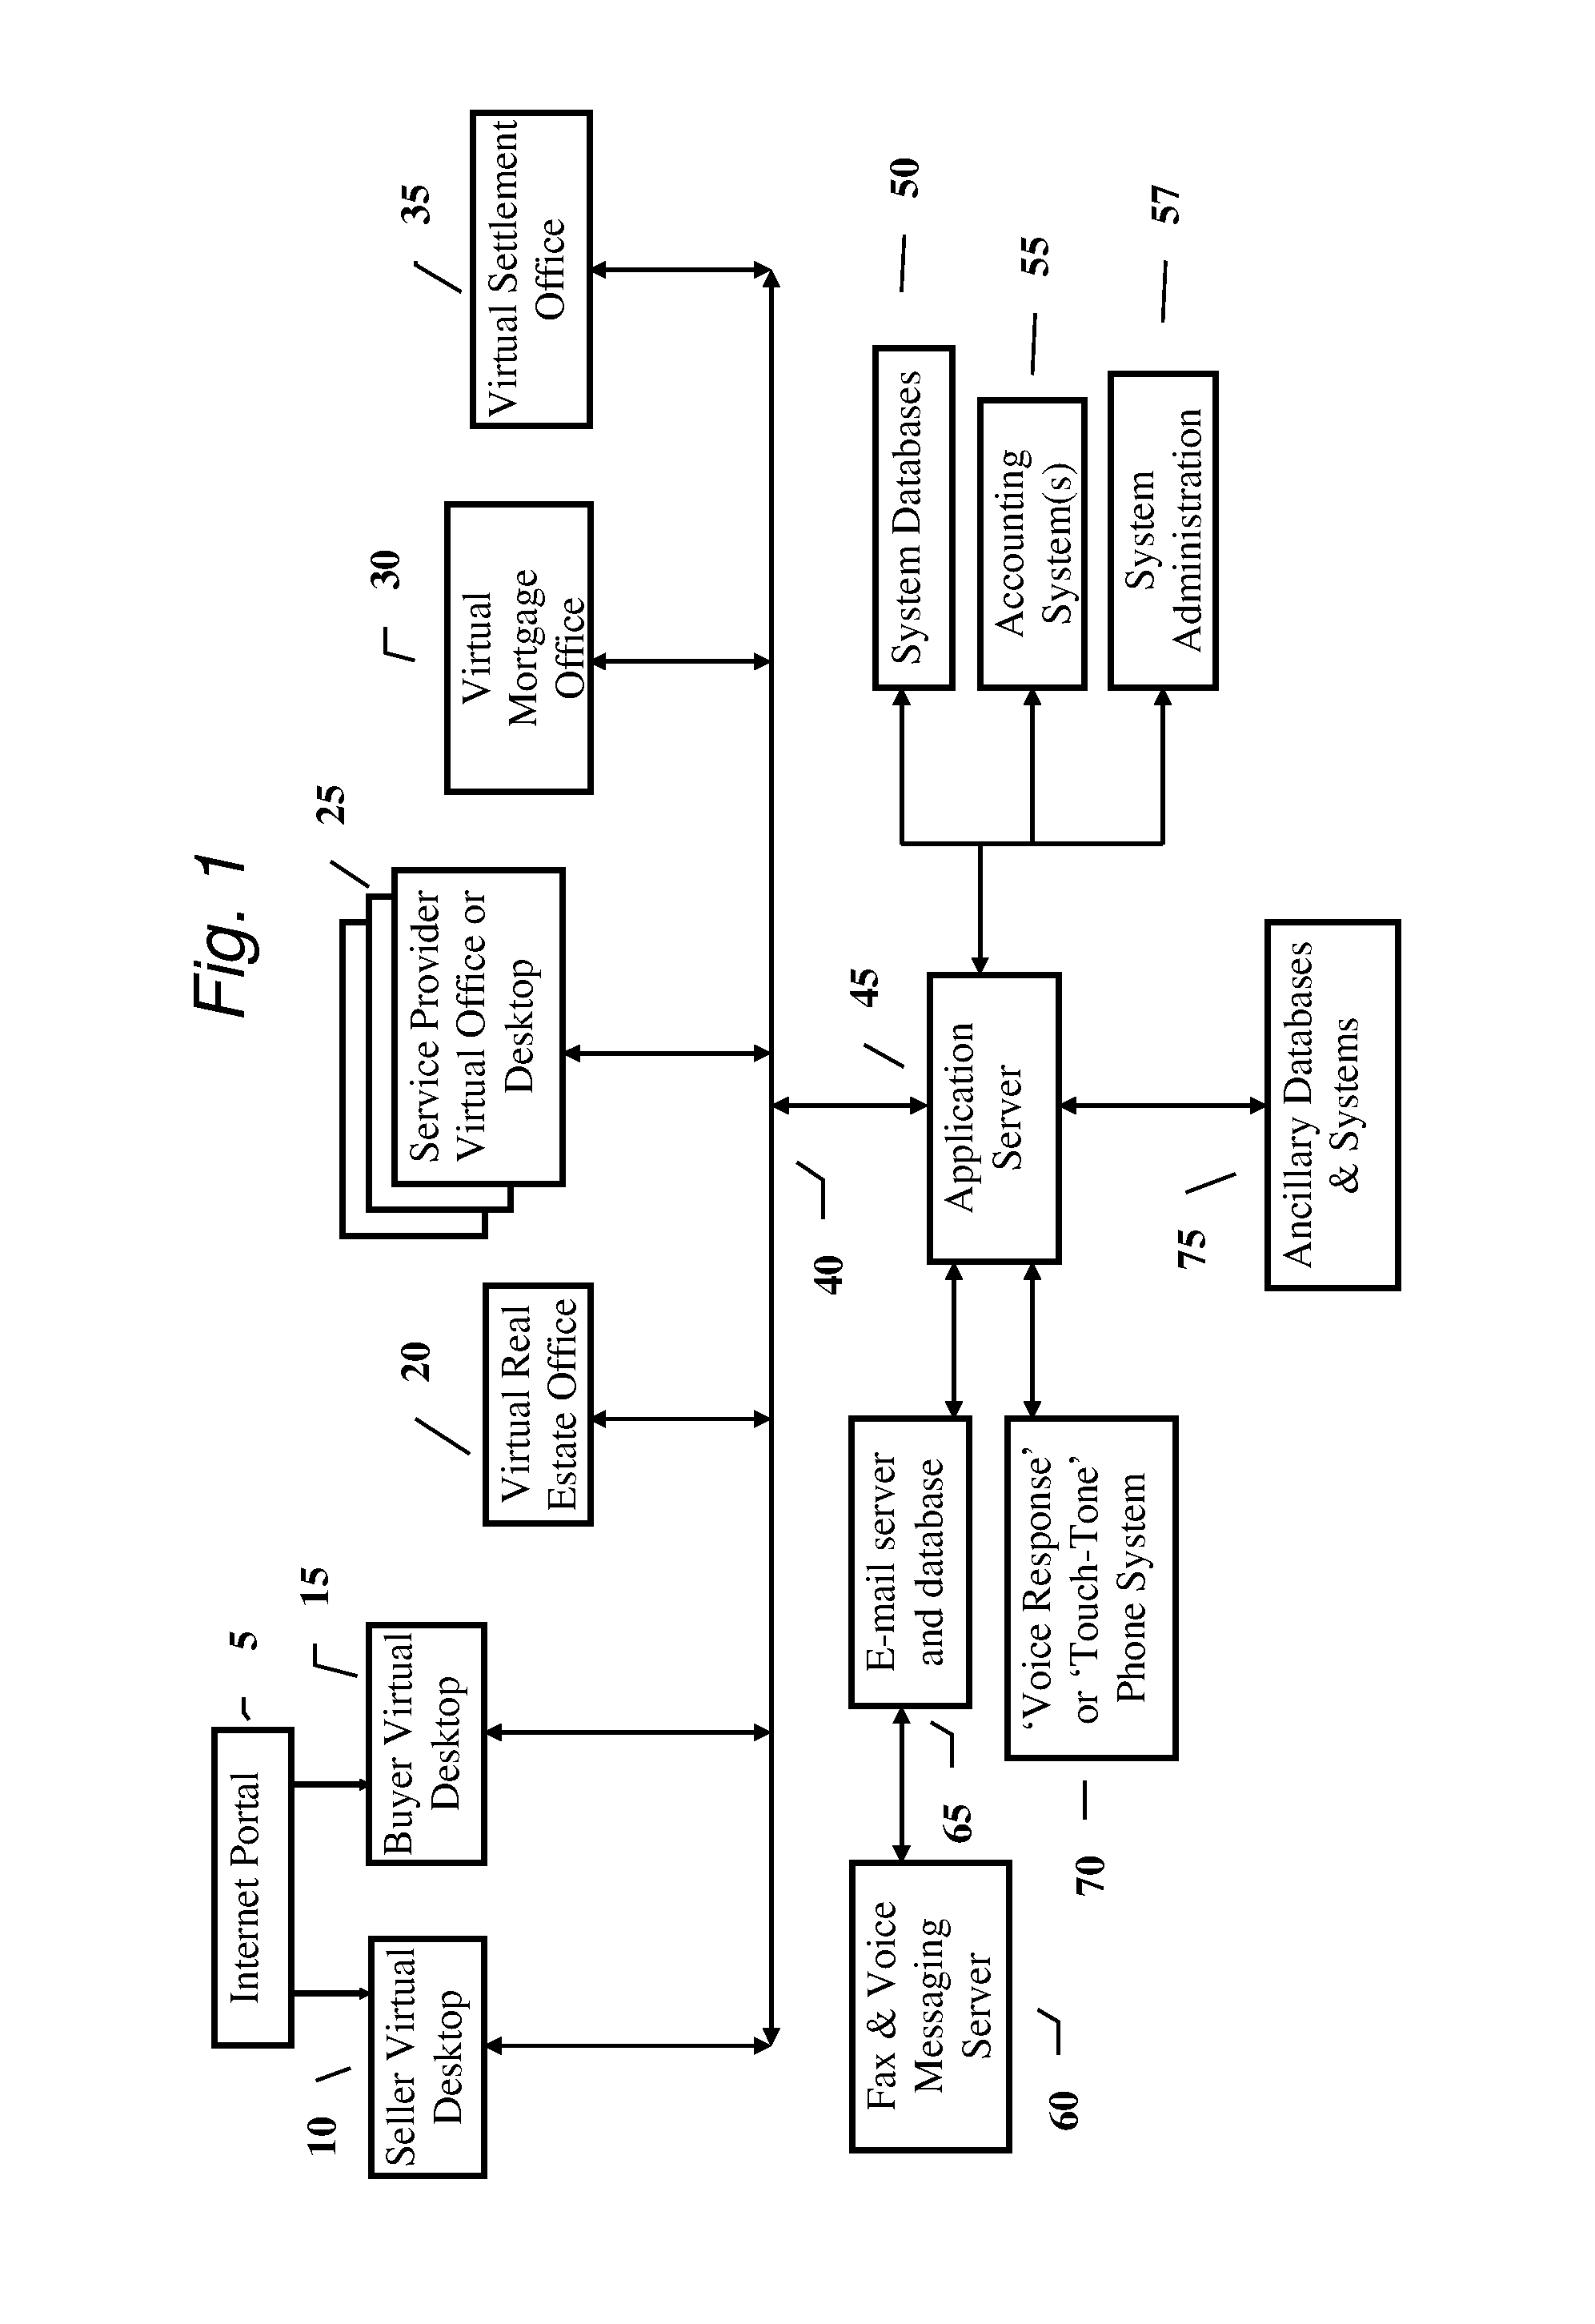 Computerized process to, for example, automate the home sale, mortgage loan financing and settlement process, and the home mortgage loan refinancing and settlement processes